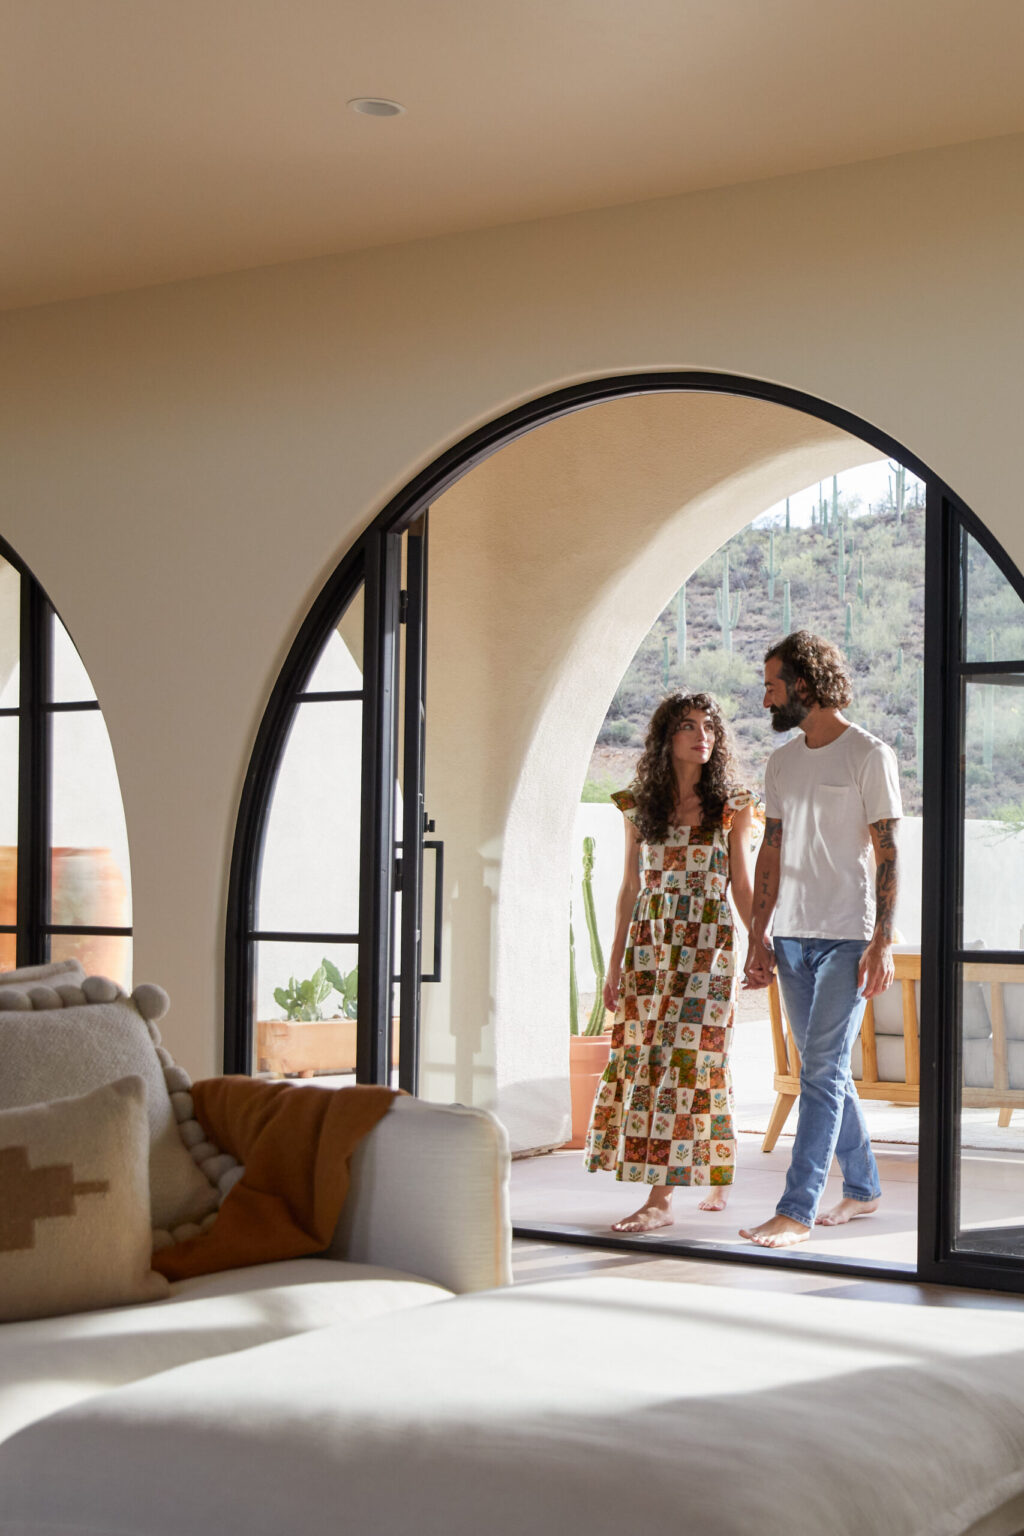 New Darlings at their Desert Home in Tucson Arizona - Arched Doorways